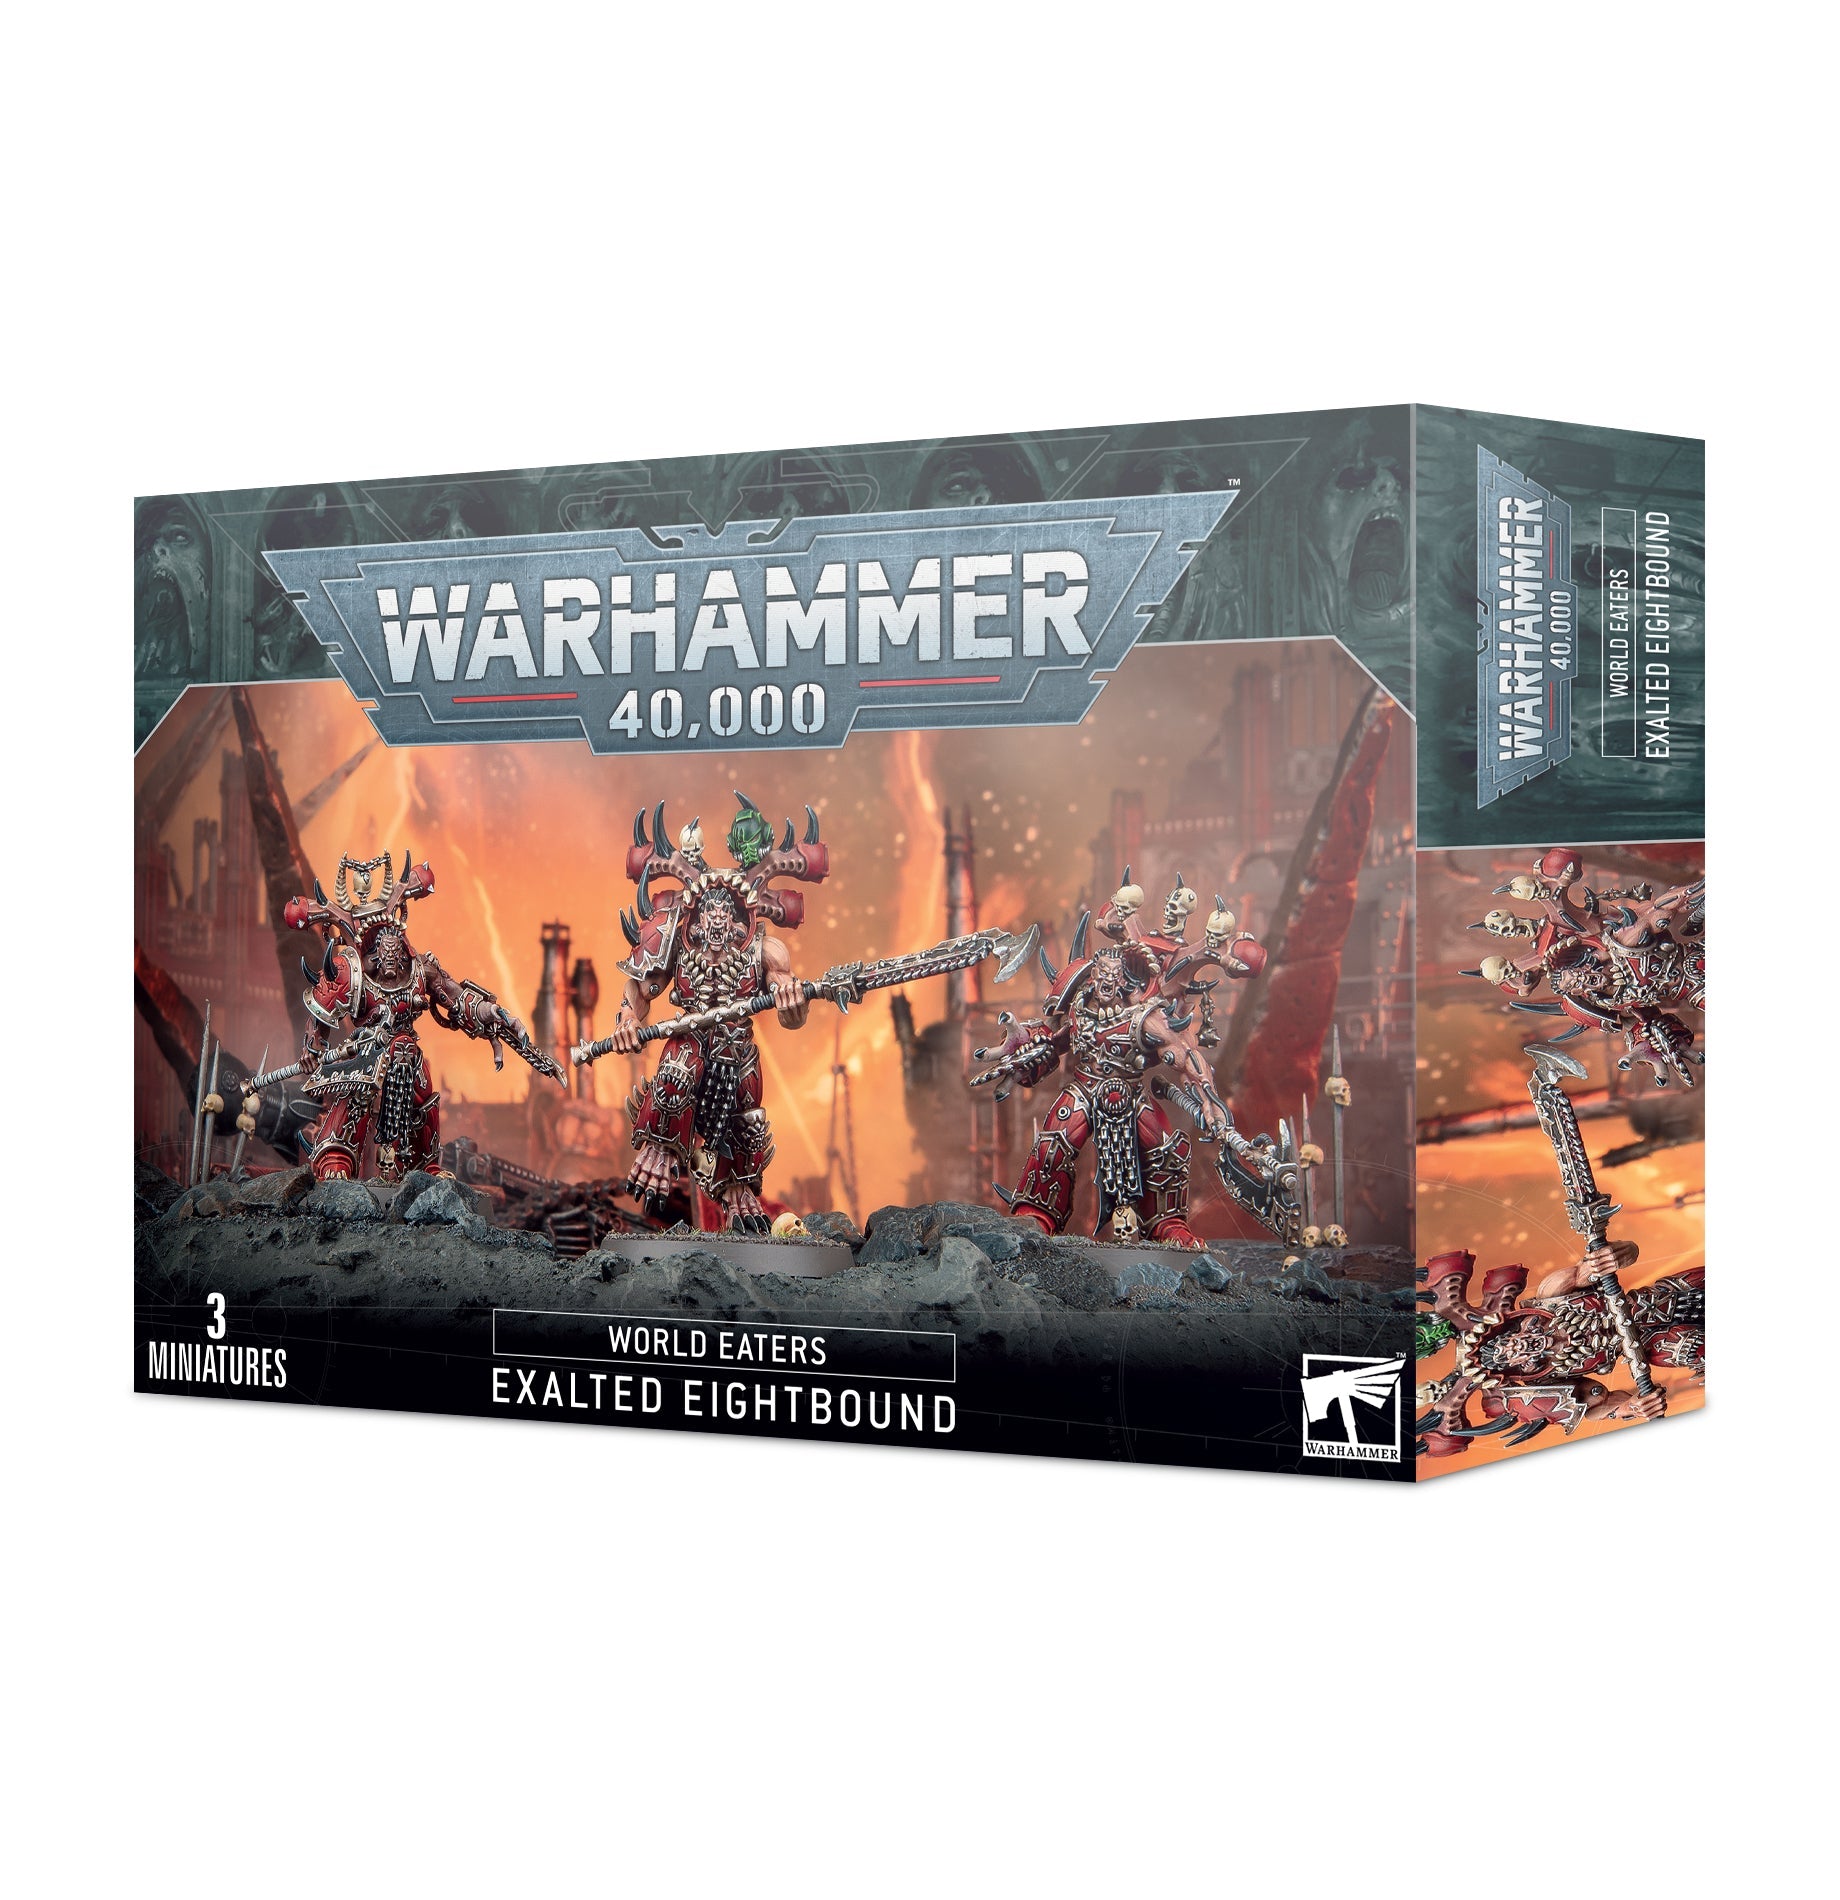 World Eaters: Exaulted Eightbound Box art